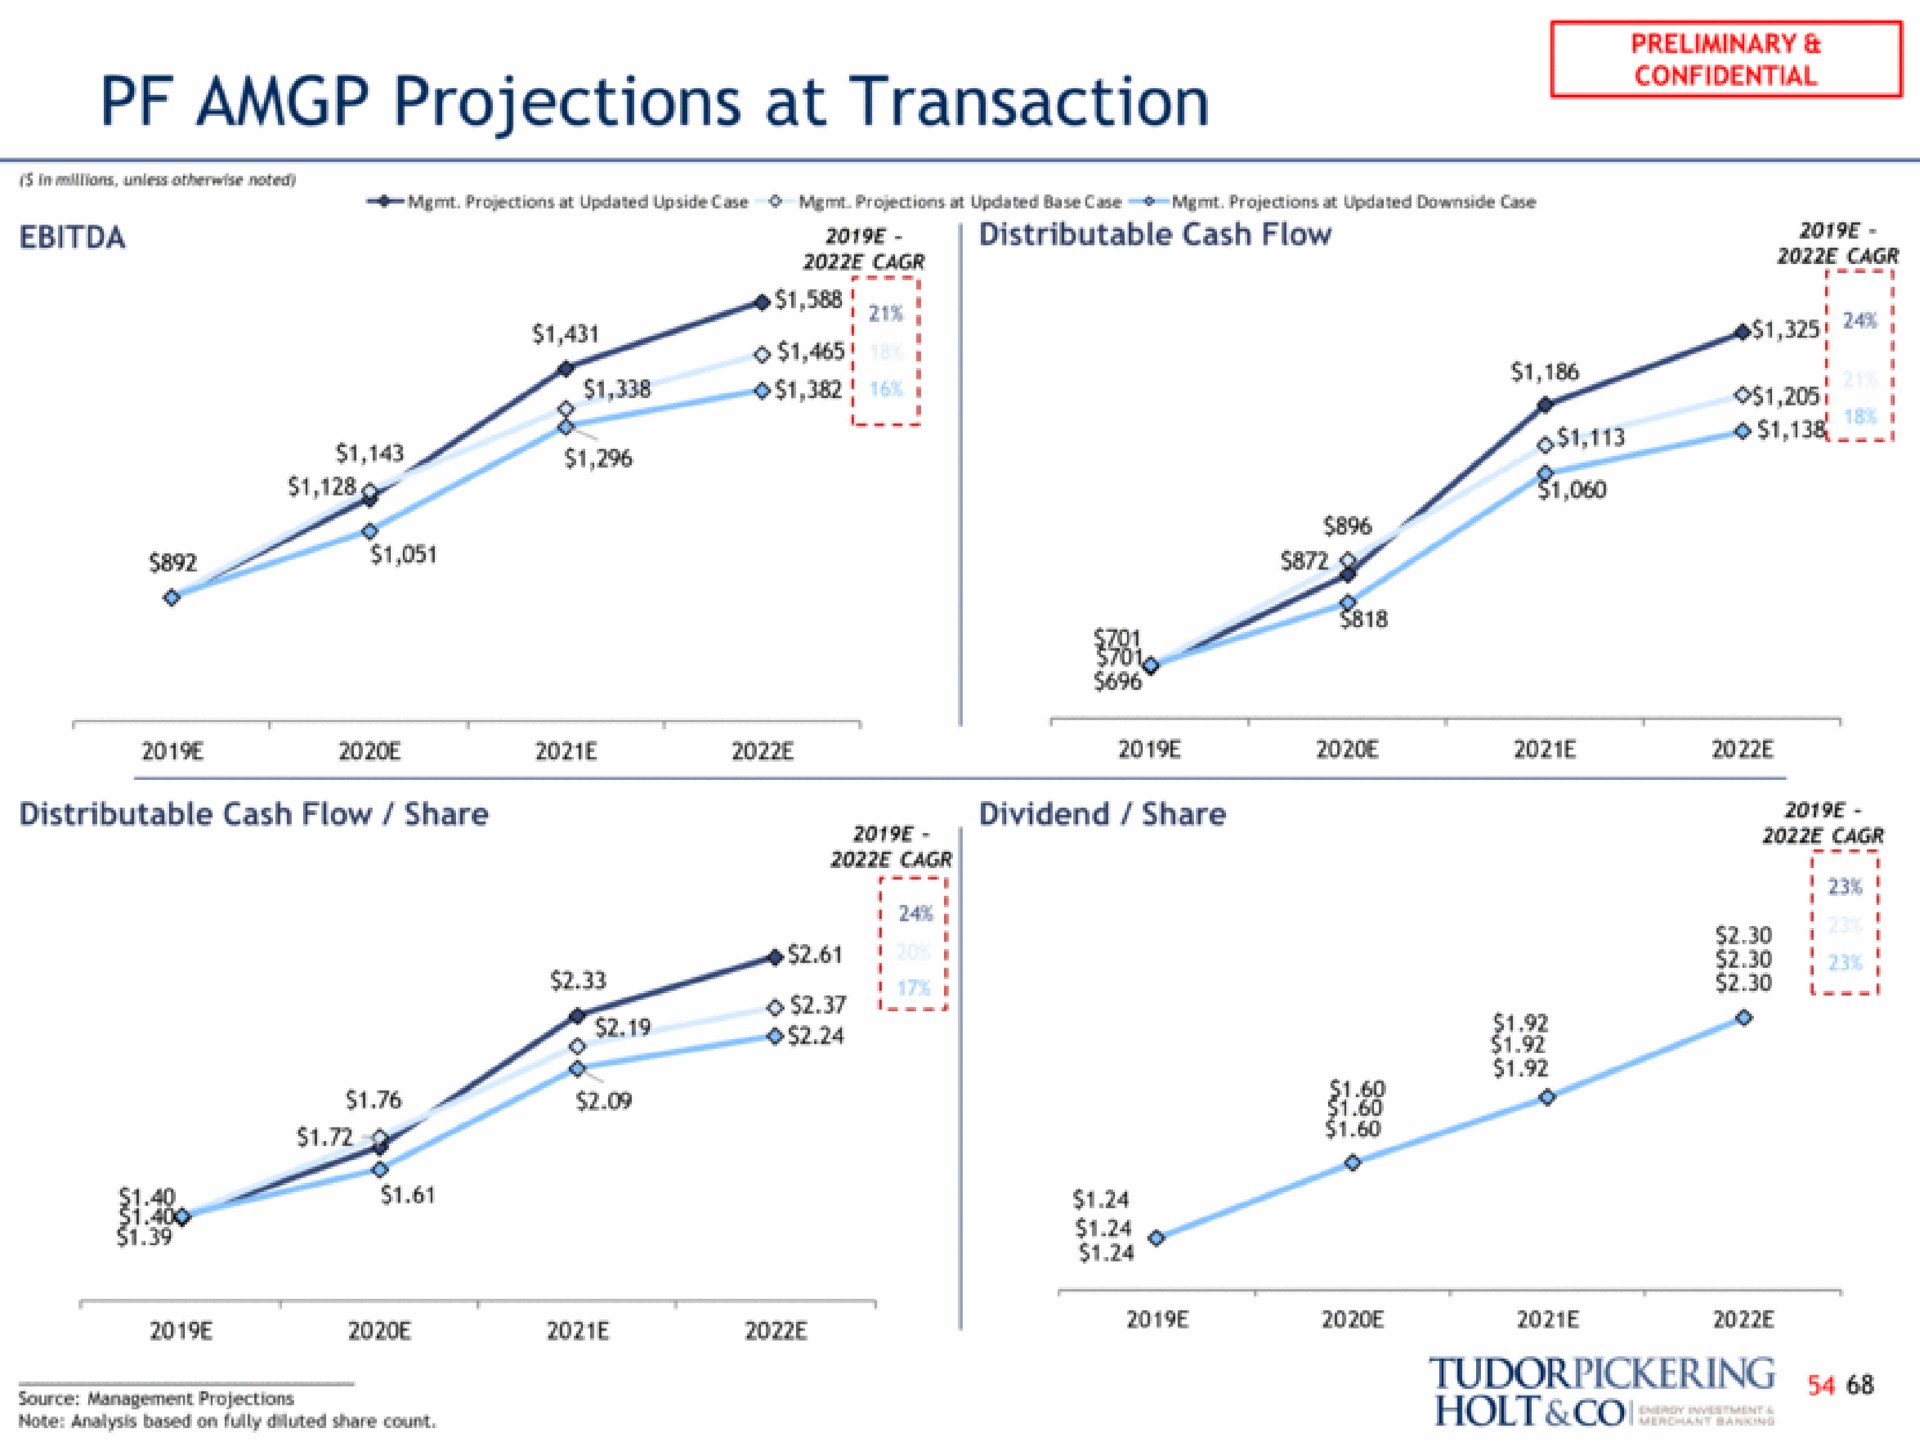 projections at transaction | Tudor, Pickering, Holt & Co